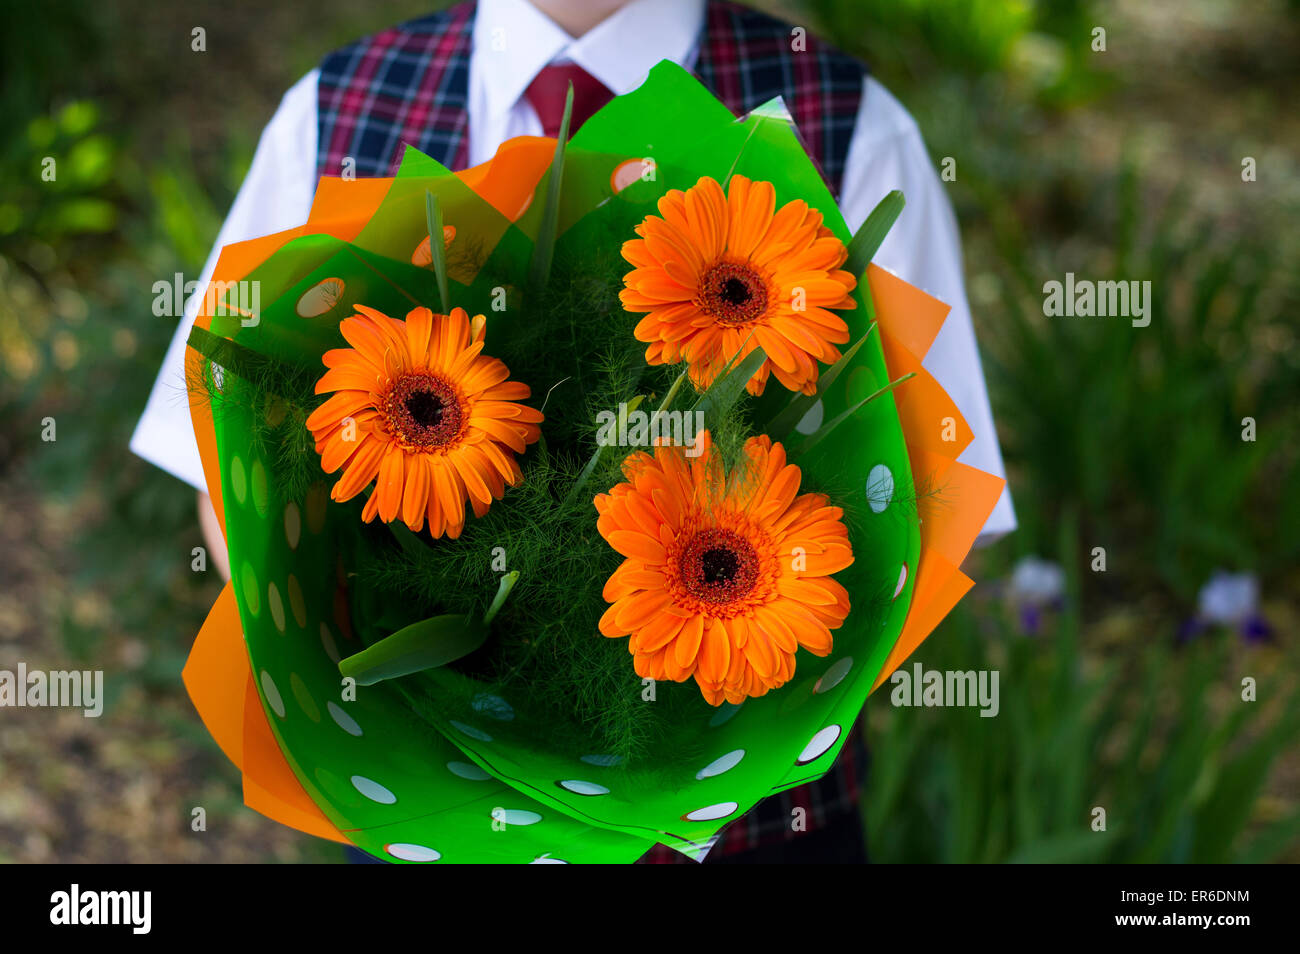 the school student with flowers, a close up Stock Photo